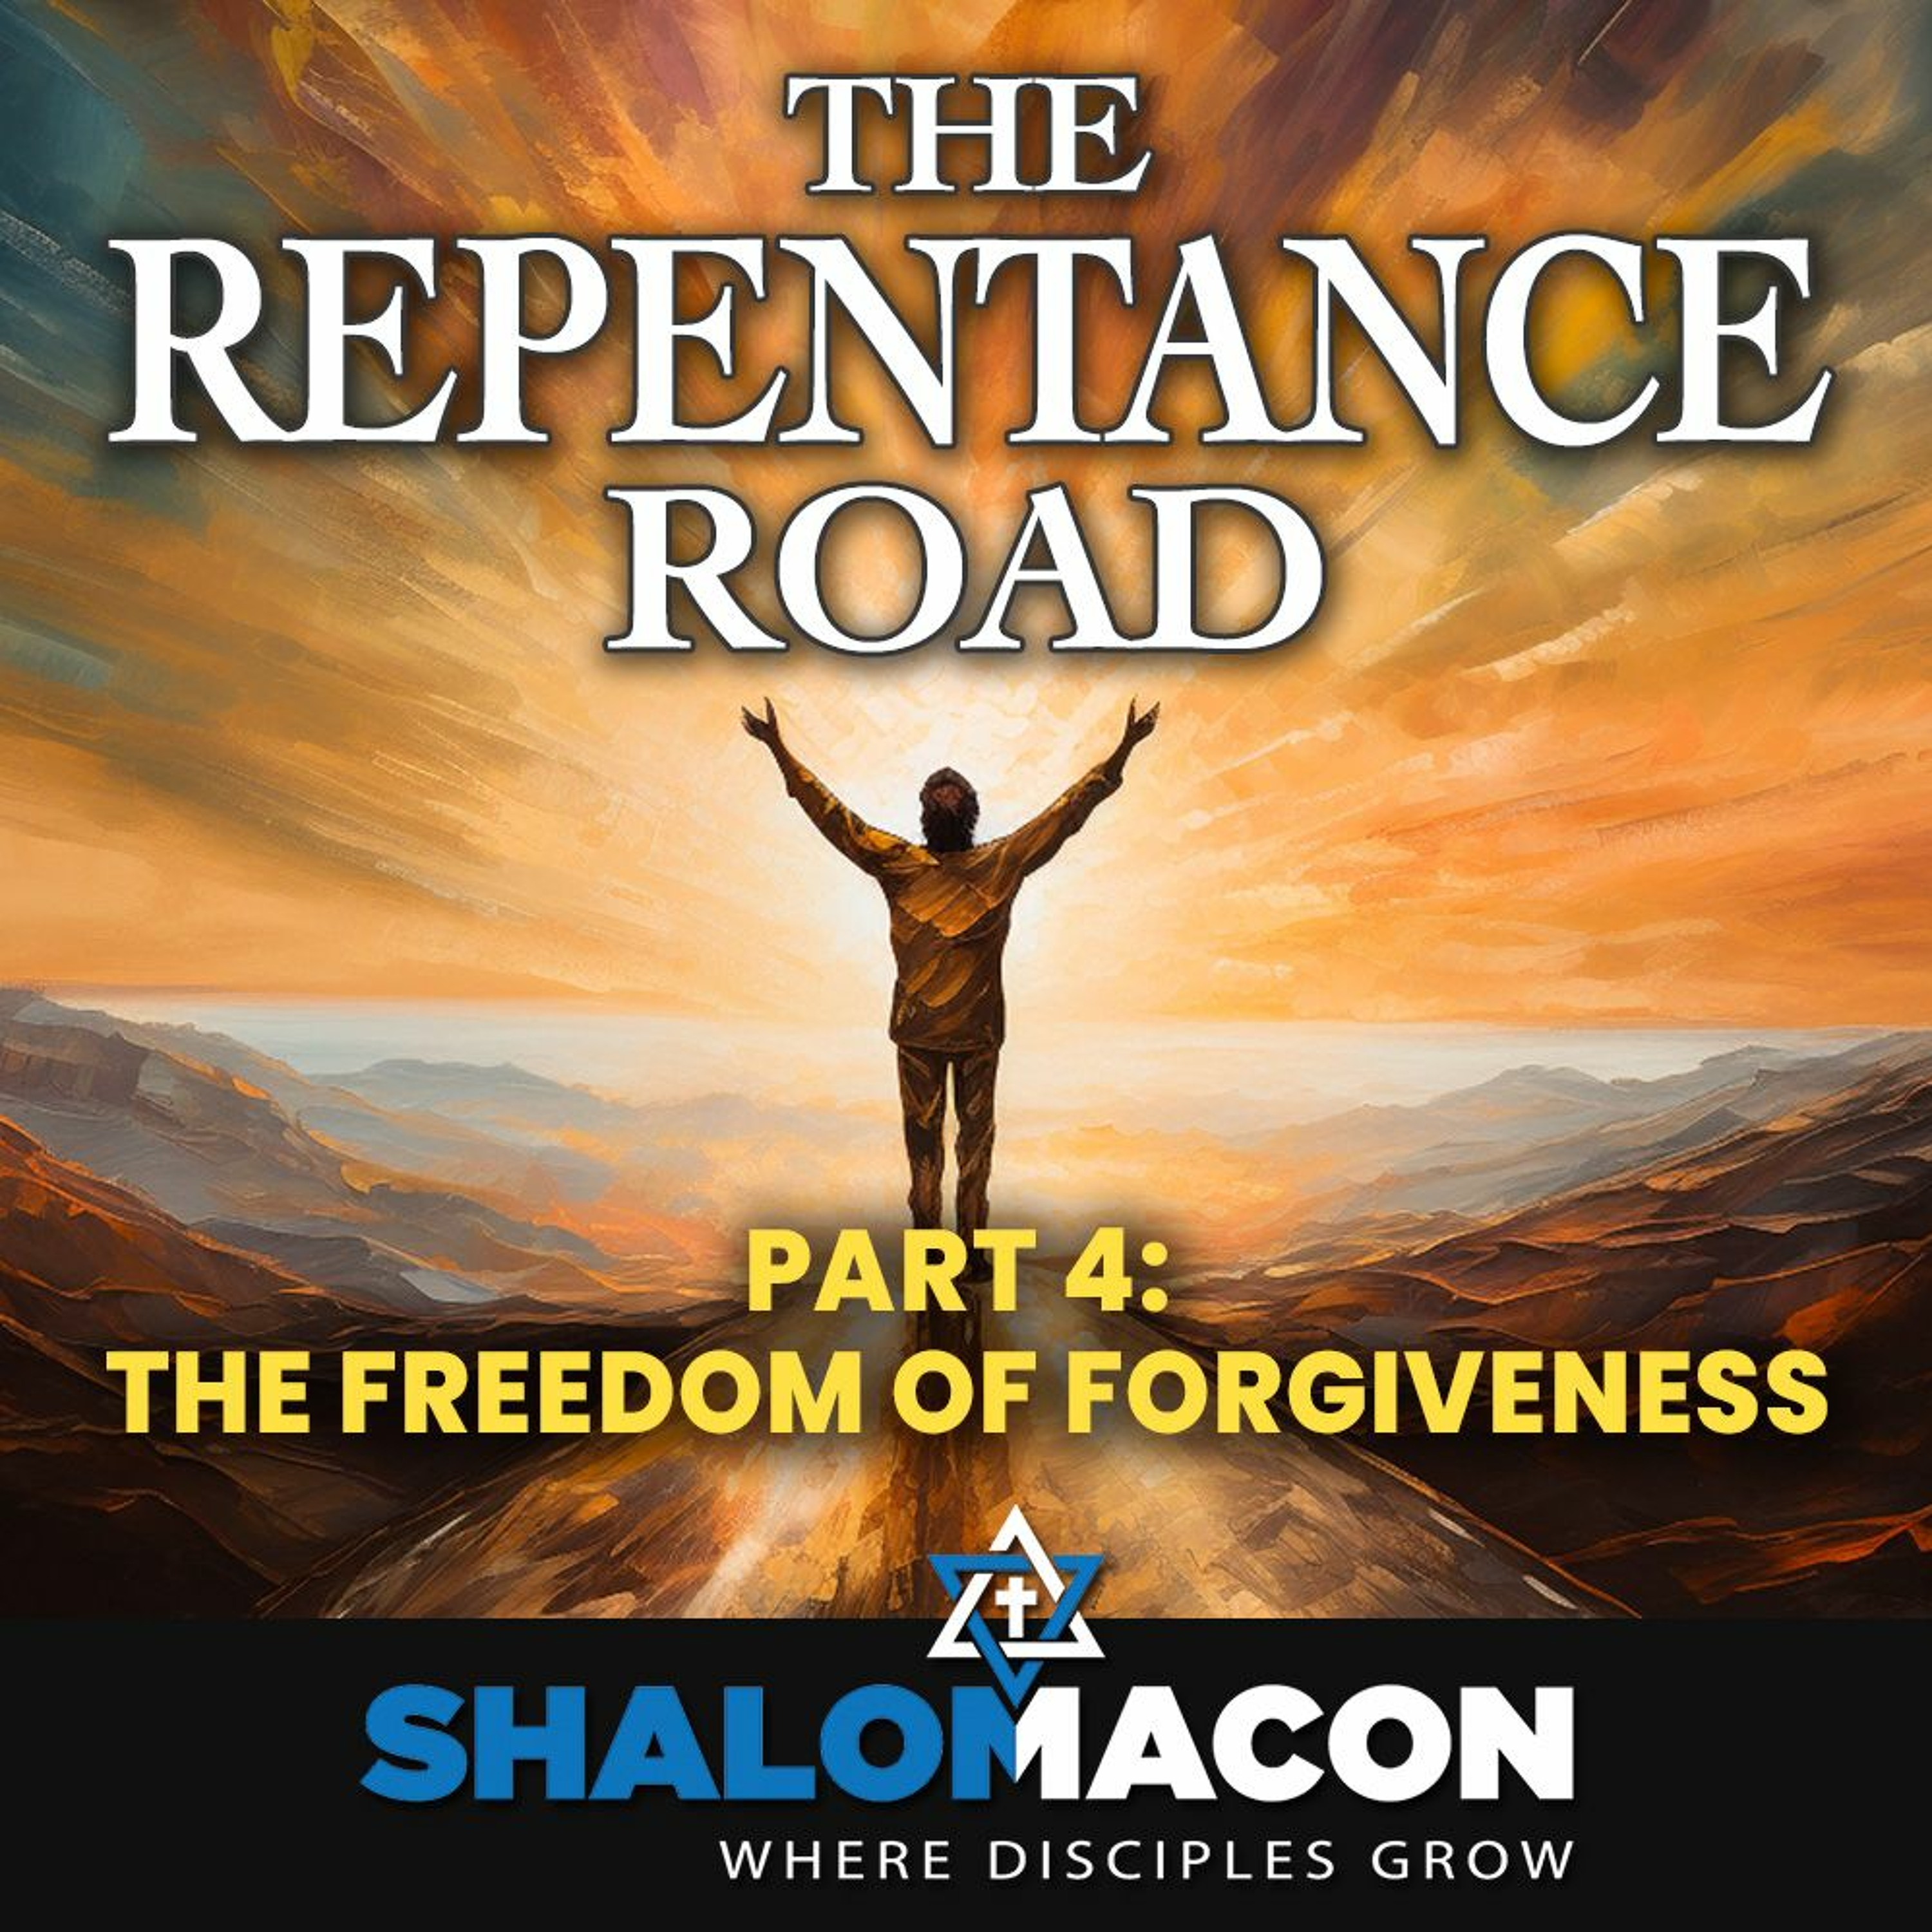 The Repentance Road, Part 4 - The Freedom of Forgiveness